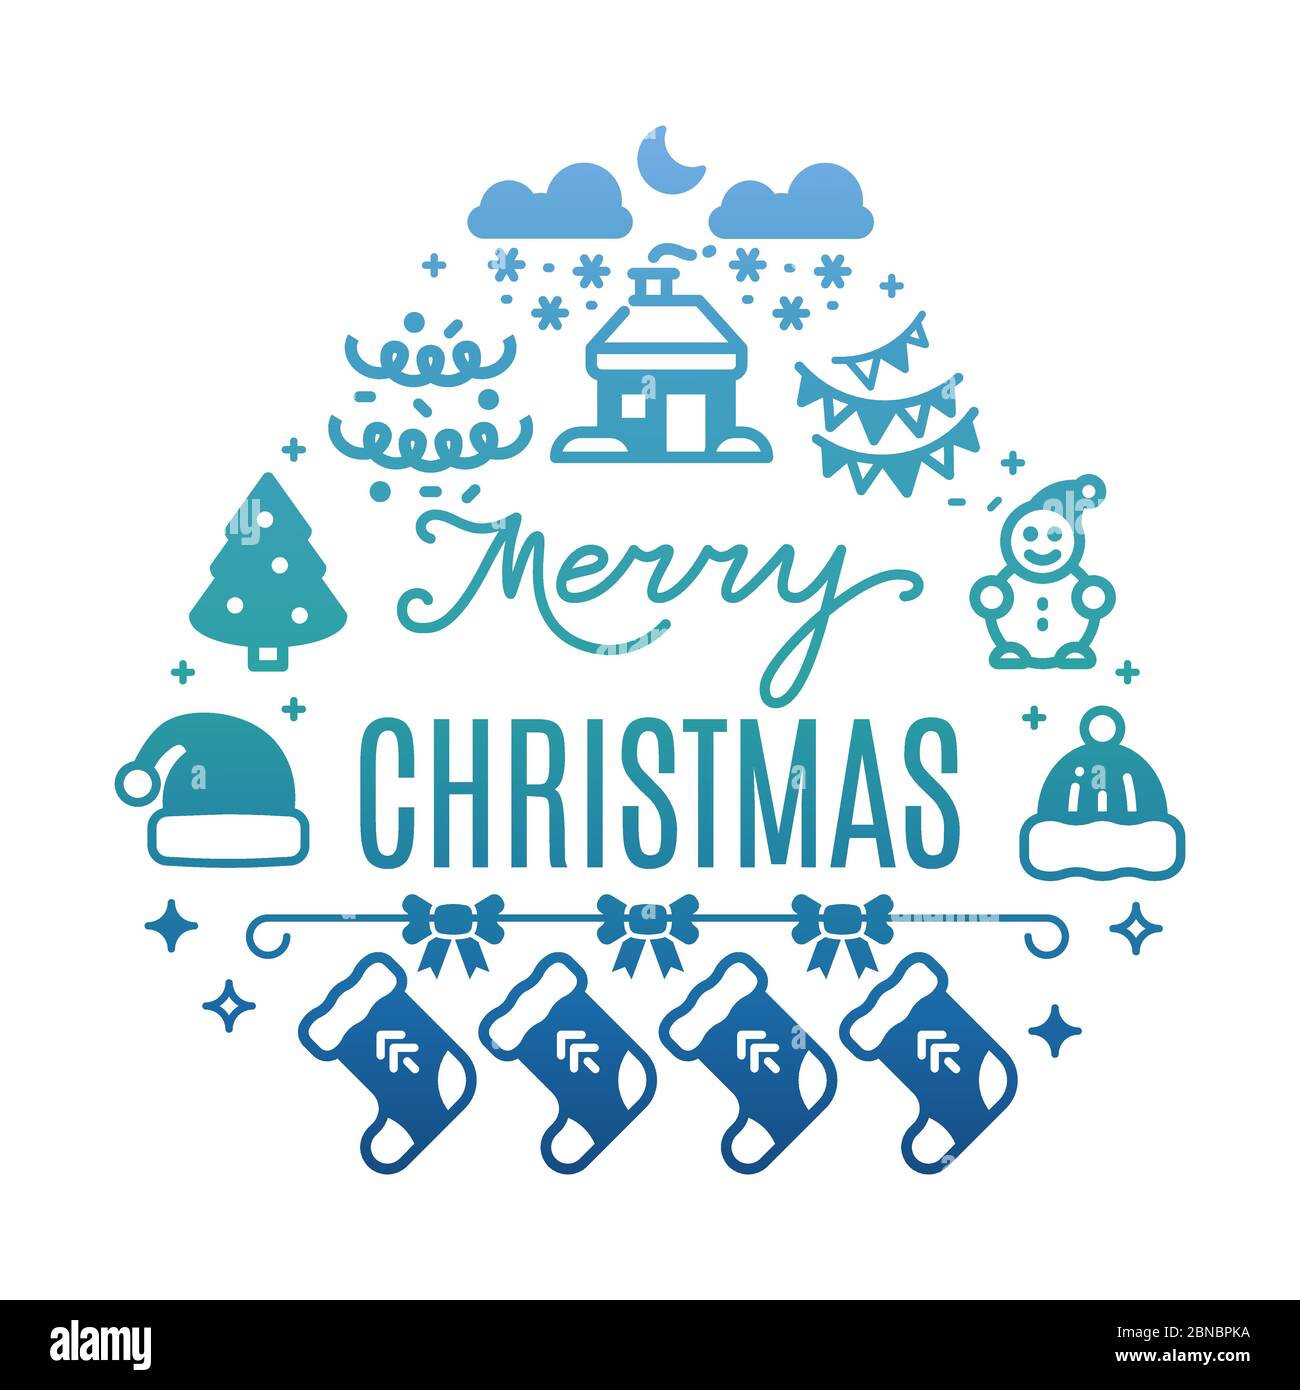 Merry Christmas colorful banner with festive icons silhouette isolated on white background illustration Stock Vector